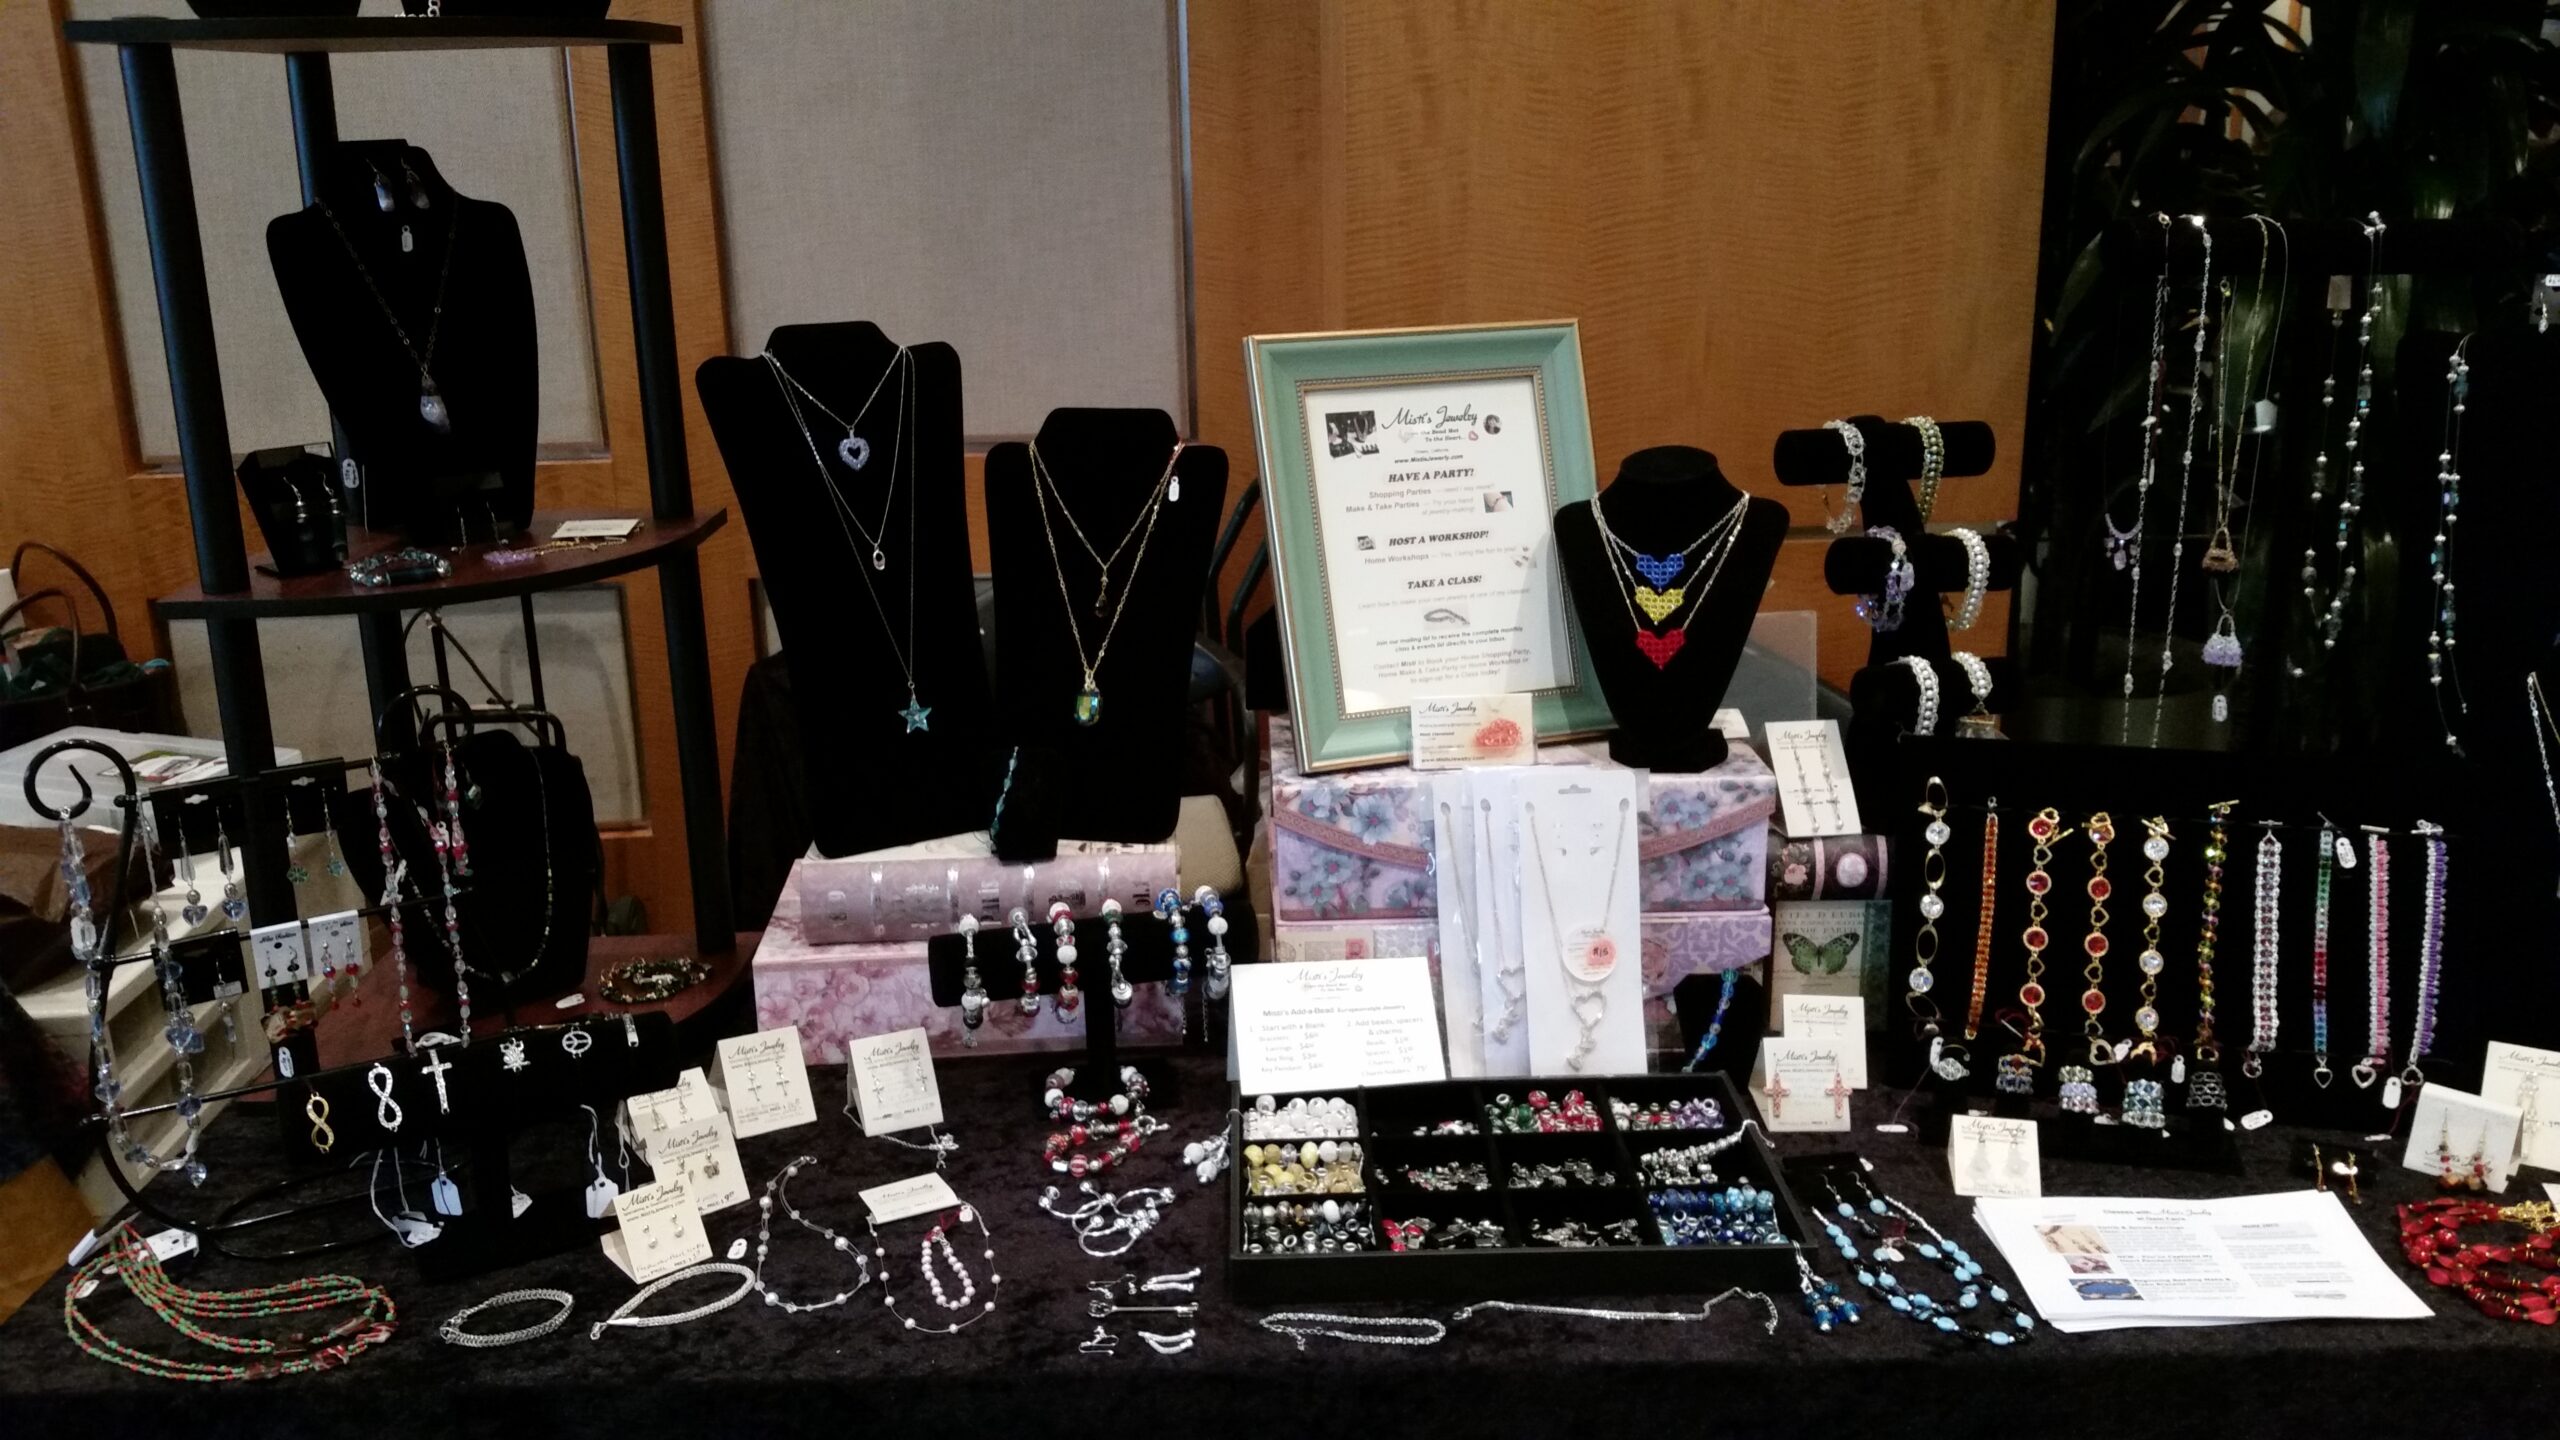 Misti's Jewlery Booth - small table set up